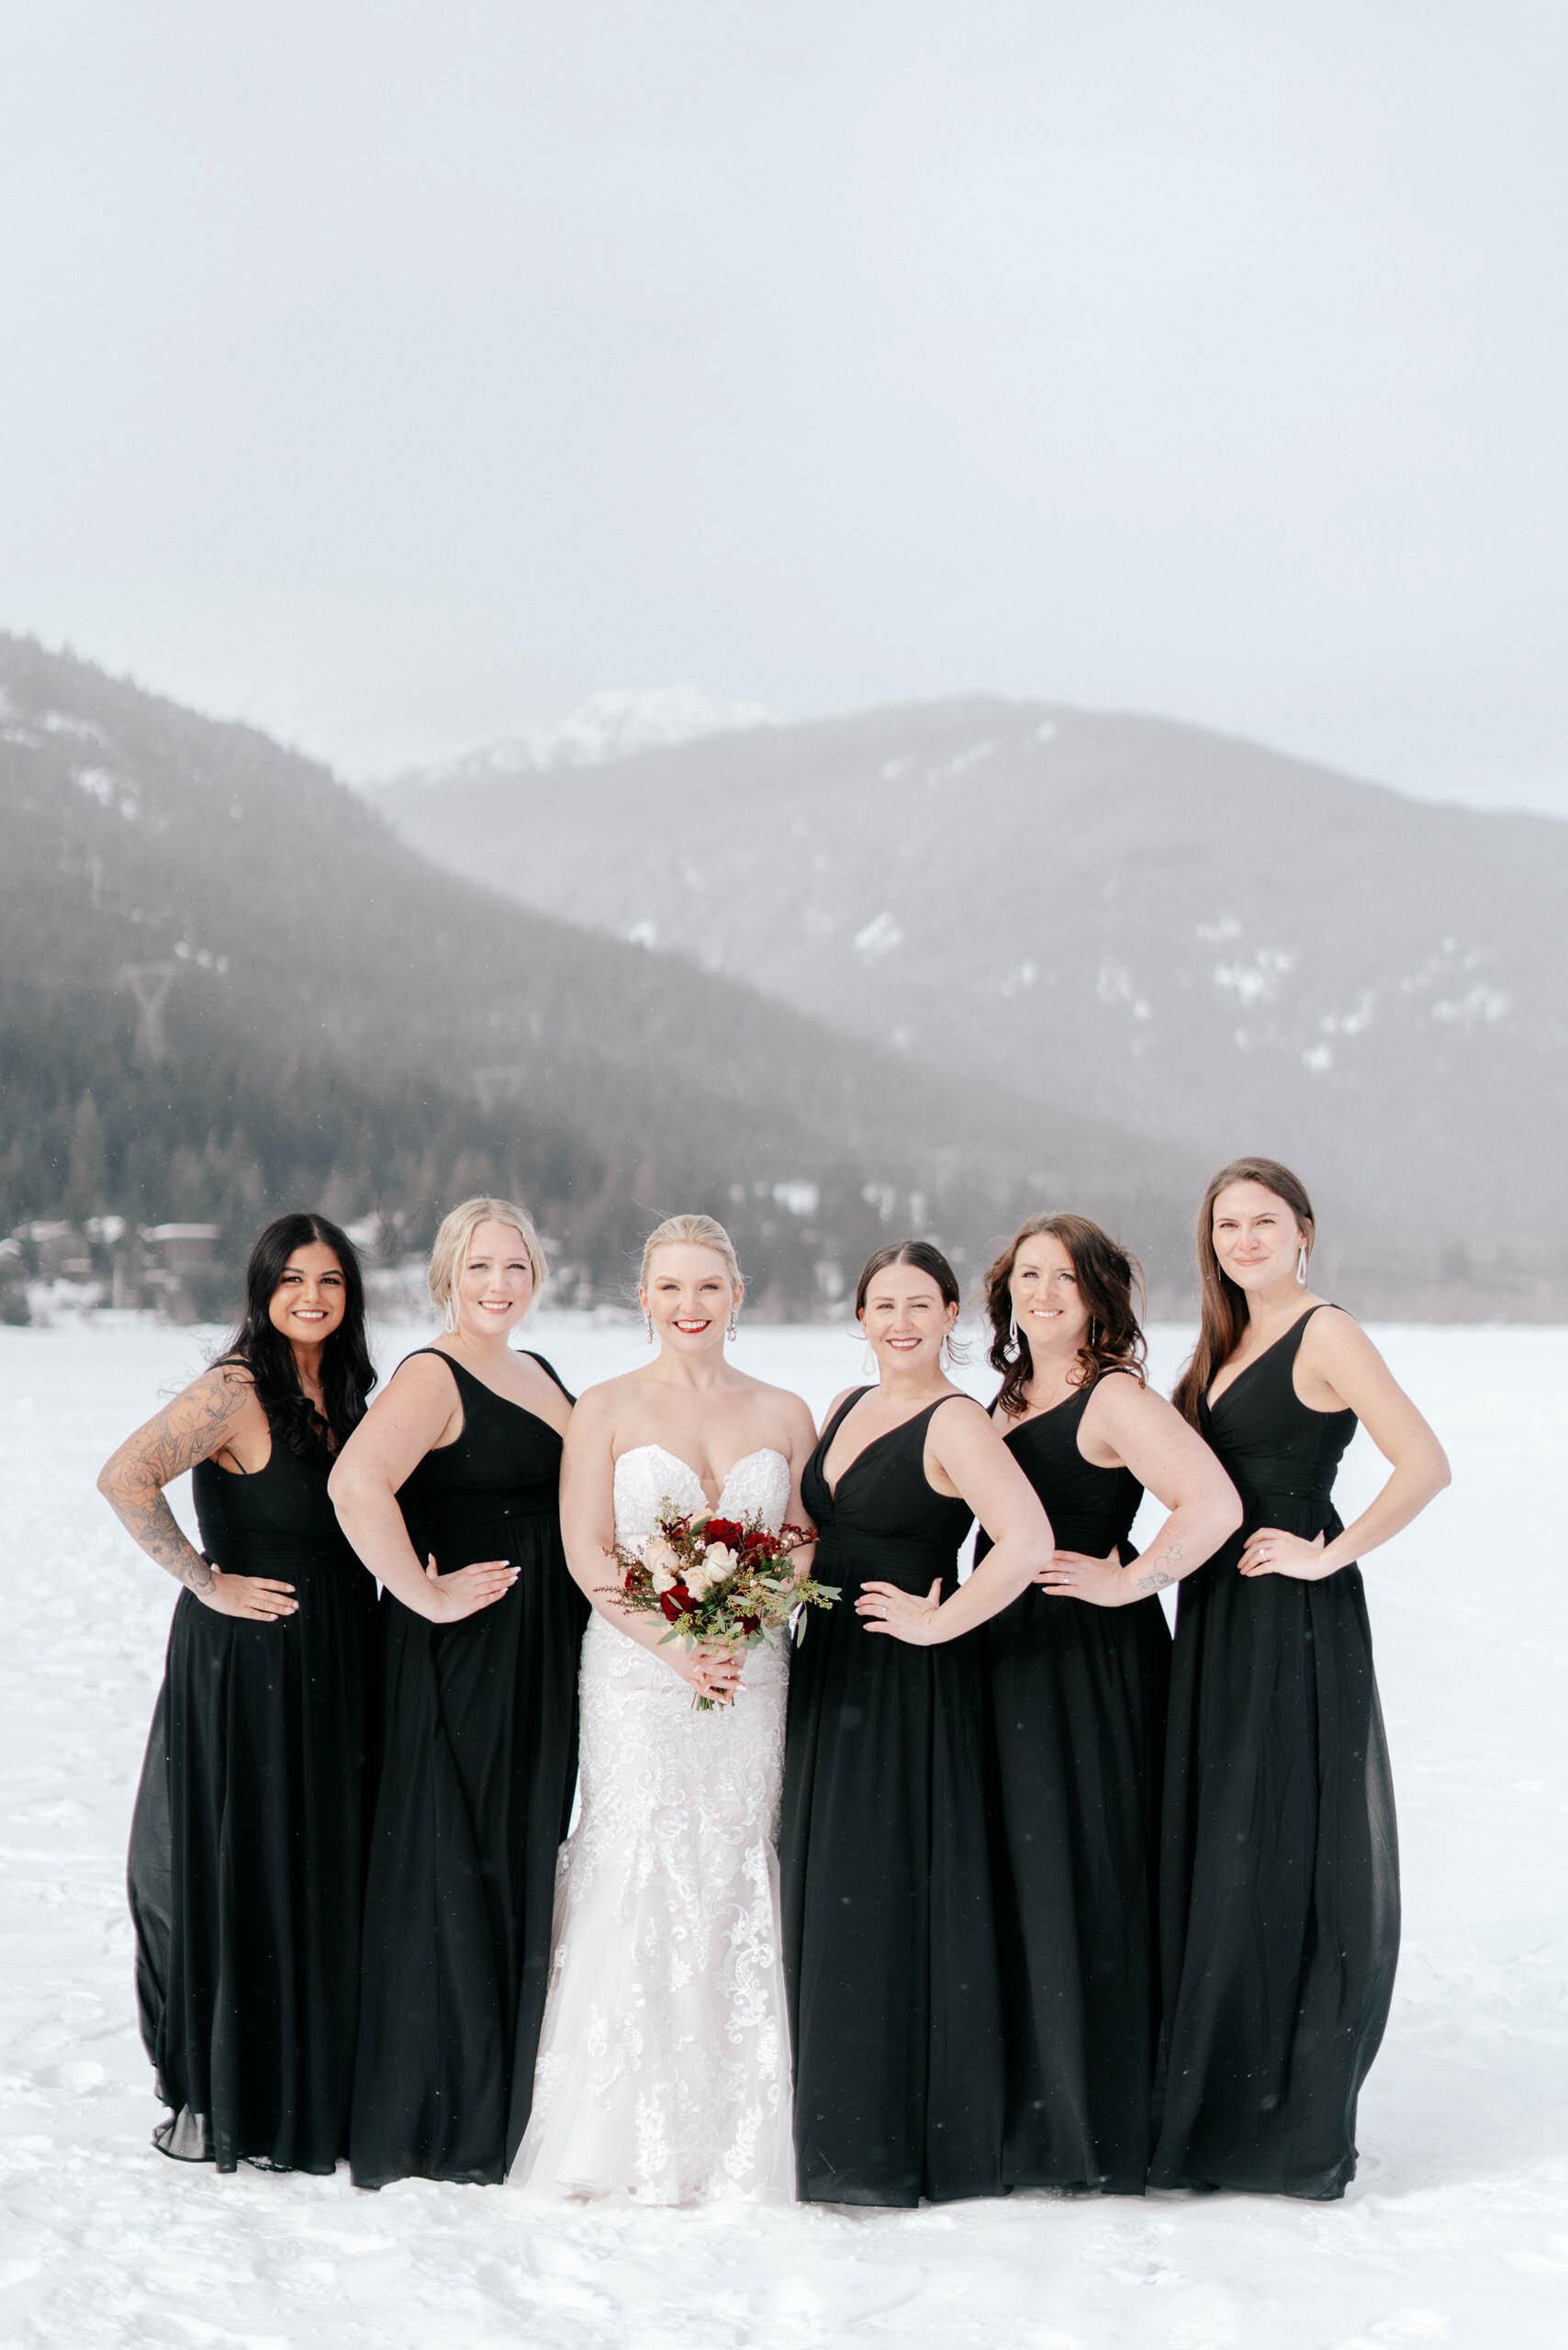 A bridal party in elegant black evening gowns stand with the bride in the snowy mountains of Whistler, BC.